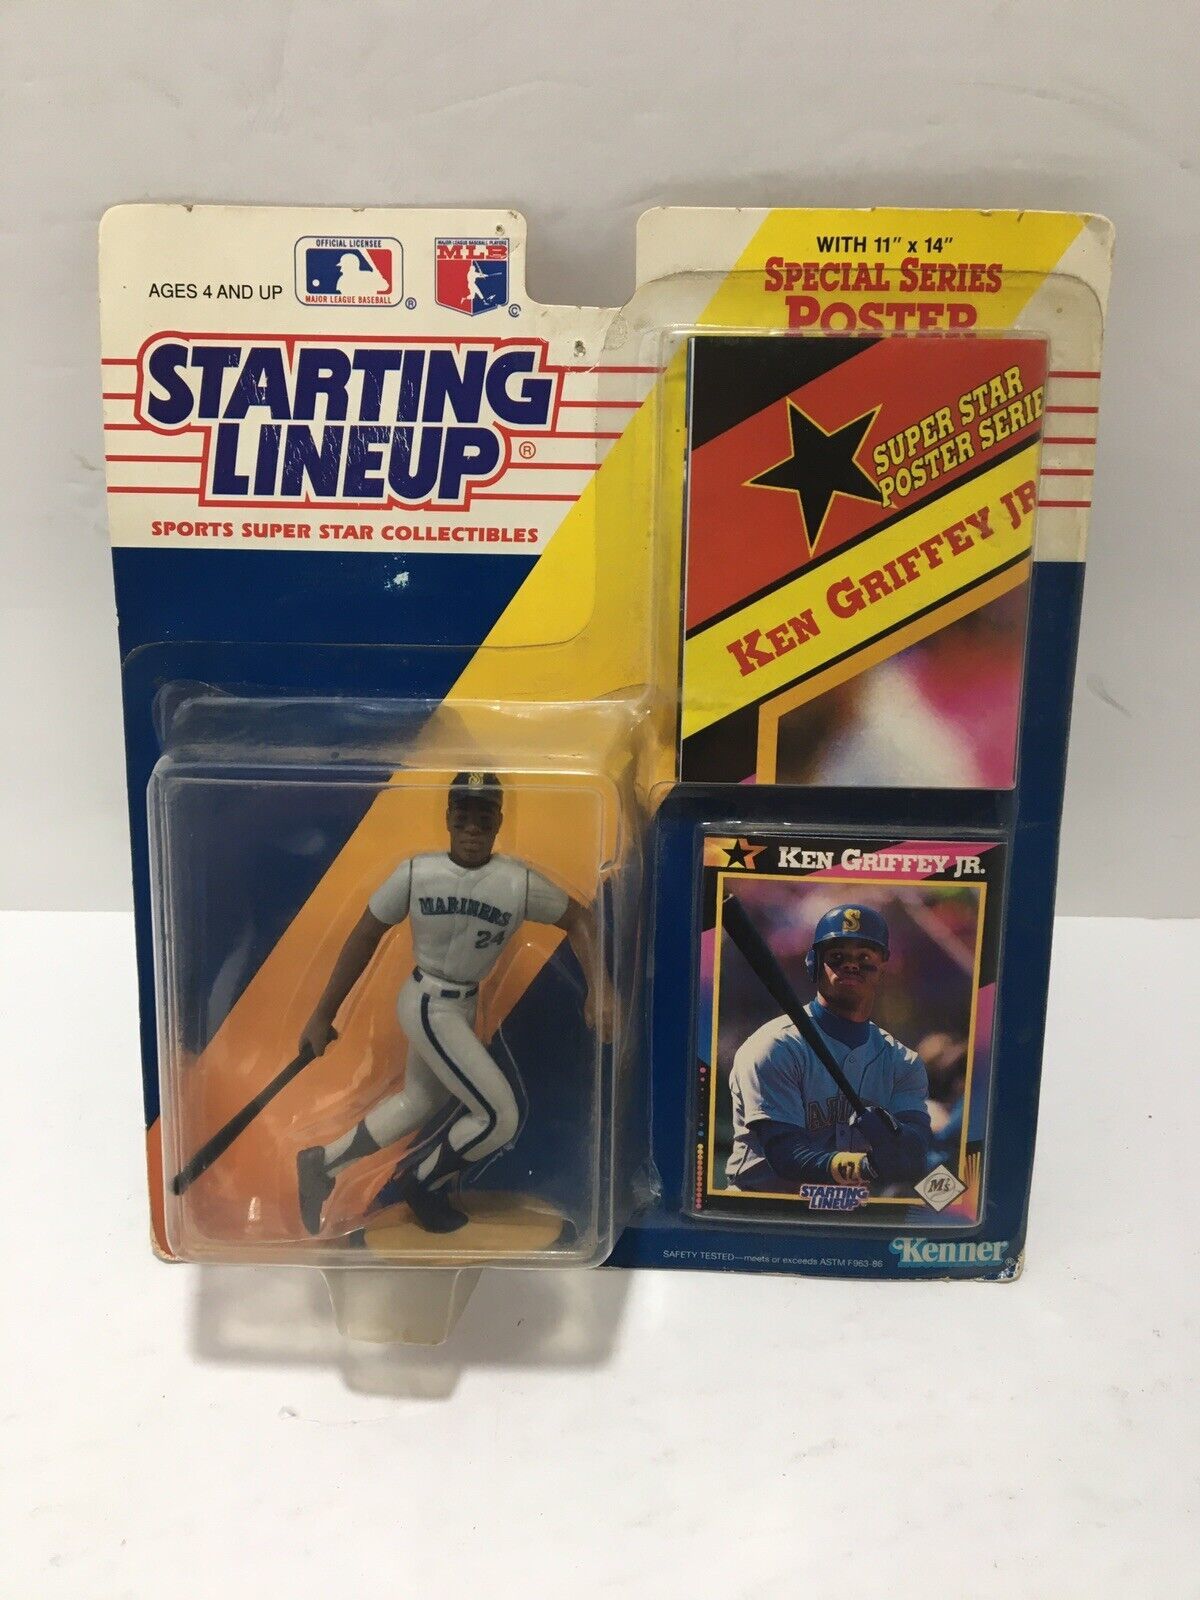 Primary image for MLB BASEBALL 1992 STARTING LINEUP + CARD BAT IN HAND KEN GRIFFEY, JR - MARINERS